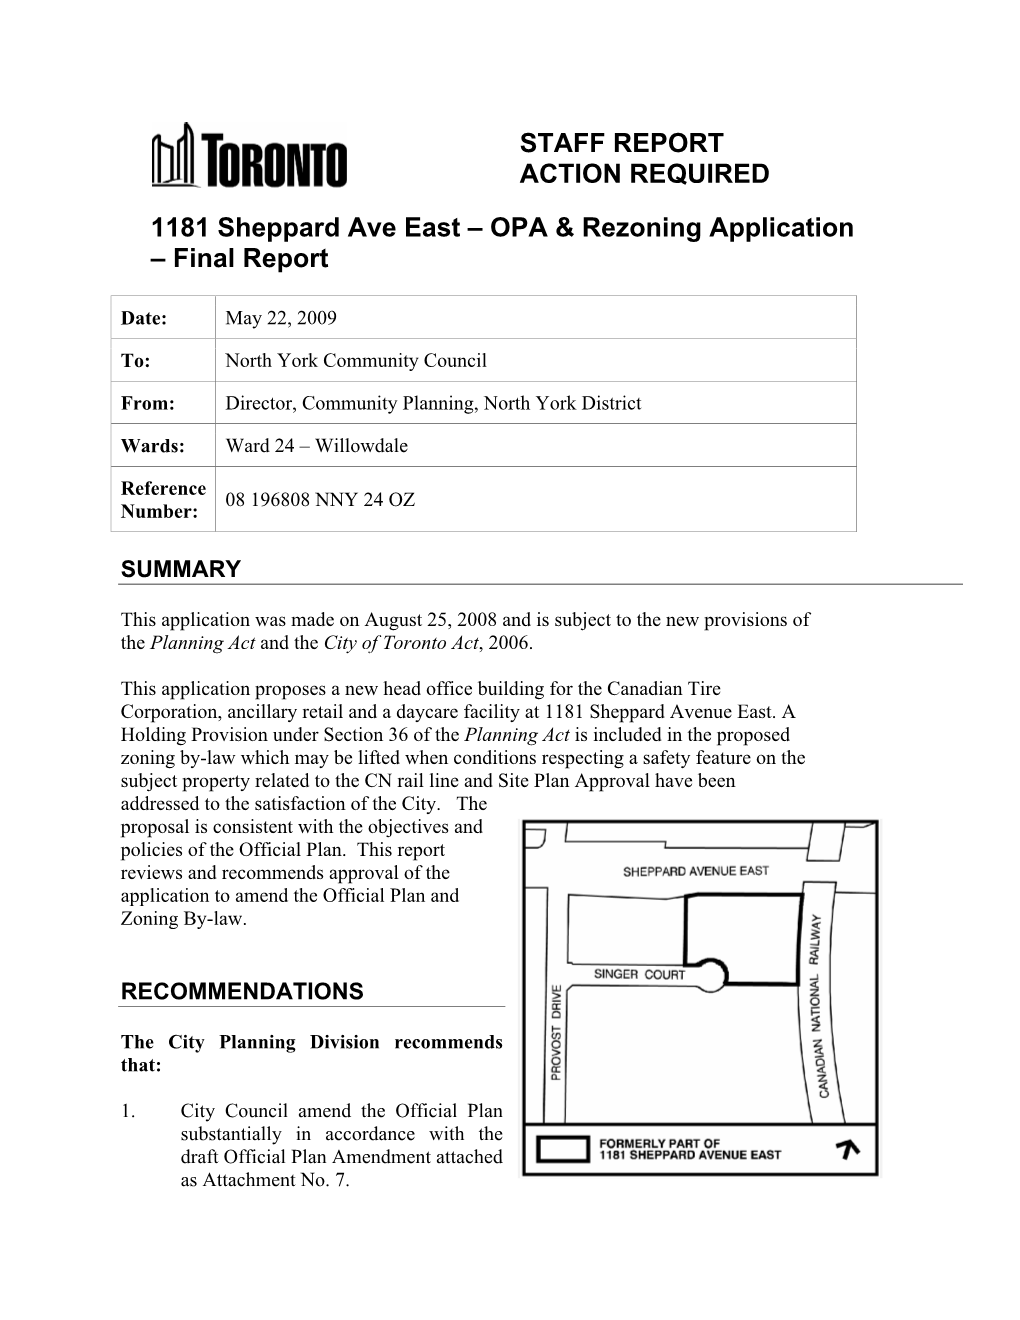 STAFF REPORT ACTION REQUIRED 1181 Sheppard Ave East – OPA & Rezoning Application – Final Report